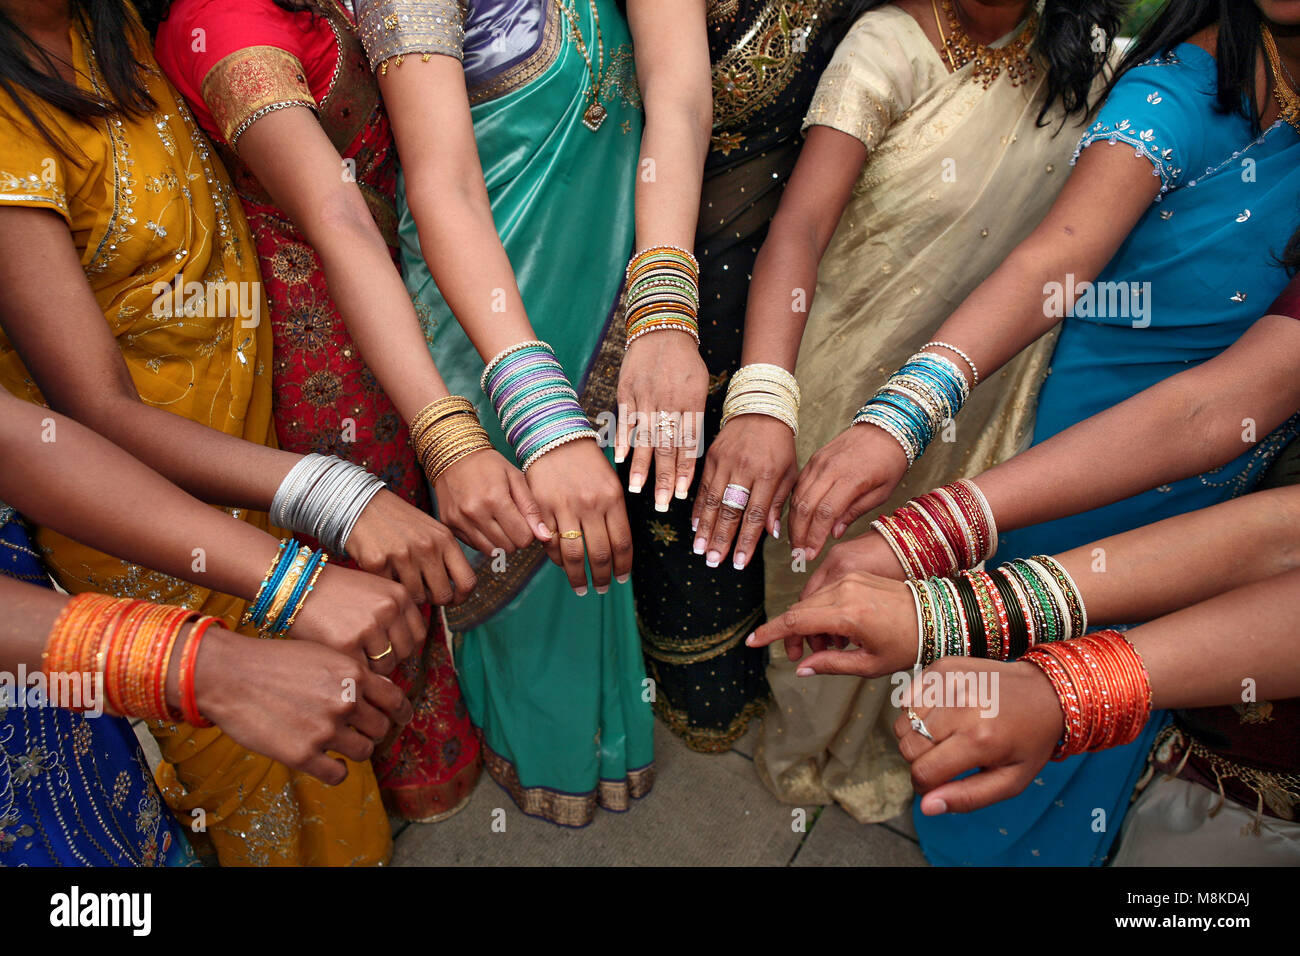 India women in colorful dresses and wrist jewelry Stock Photo